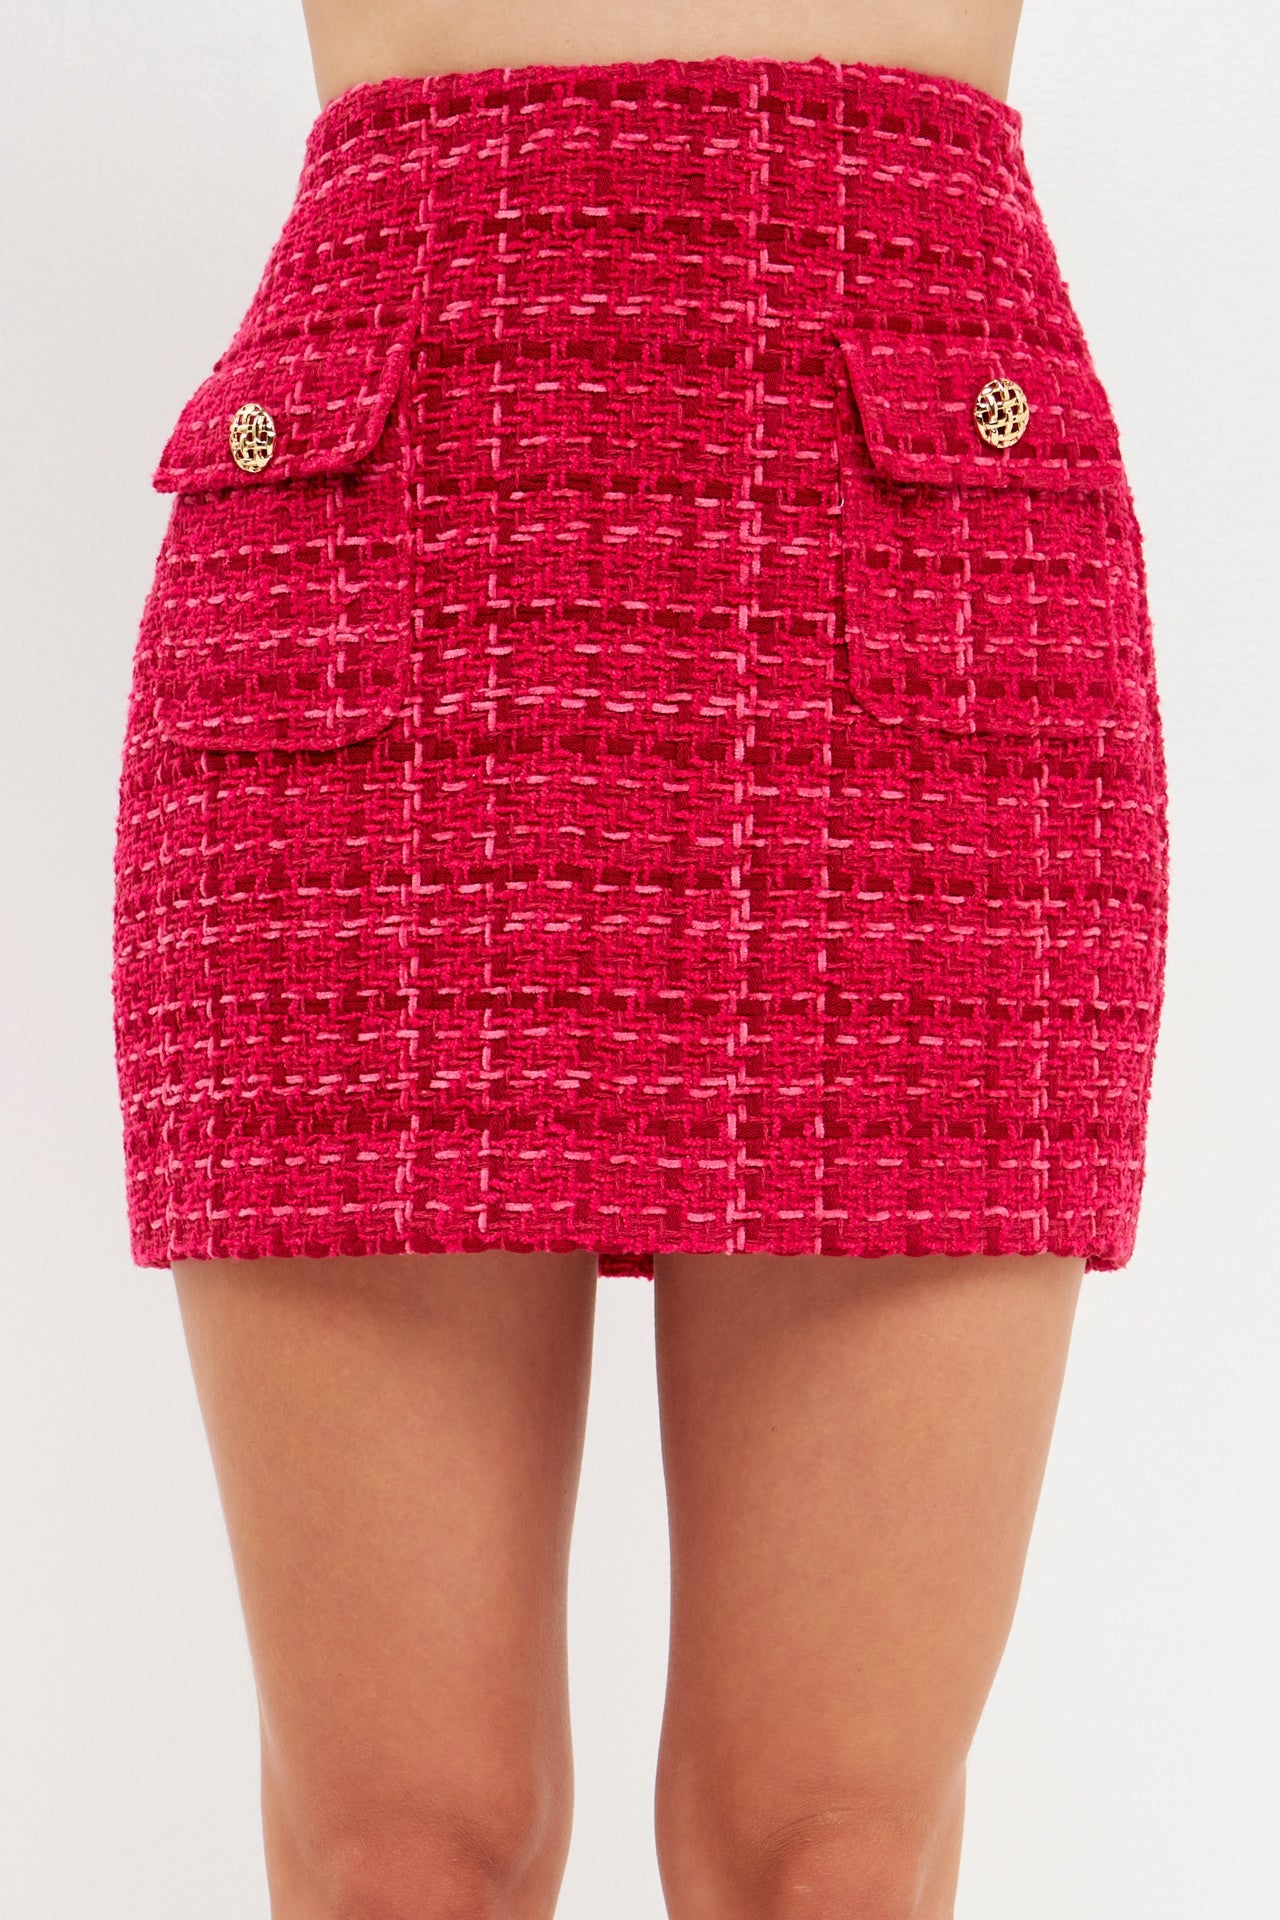 Endless Rose - Tweed Mini Skirt - Skirts in Women's Clothing available at endlessrose.com